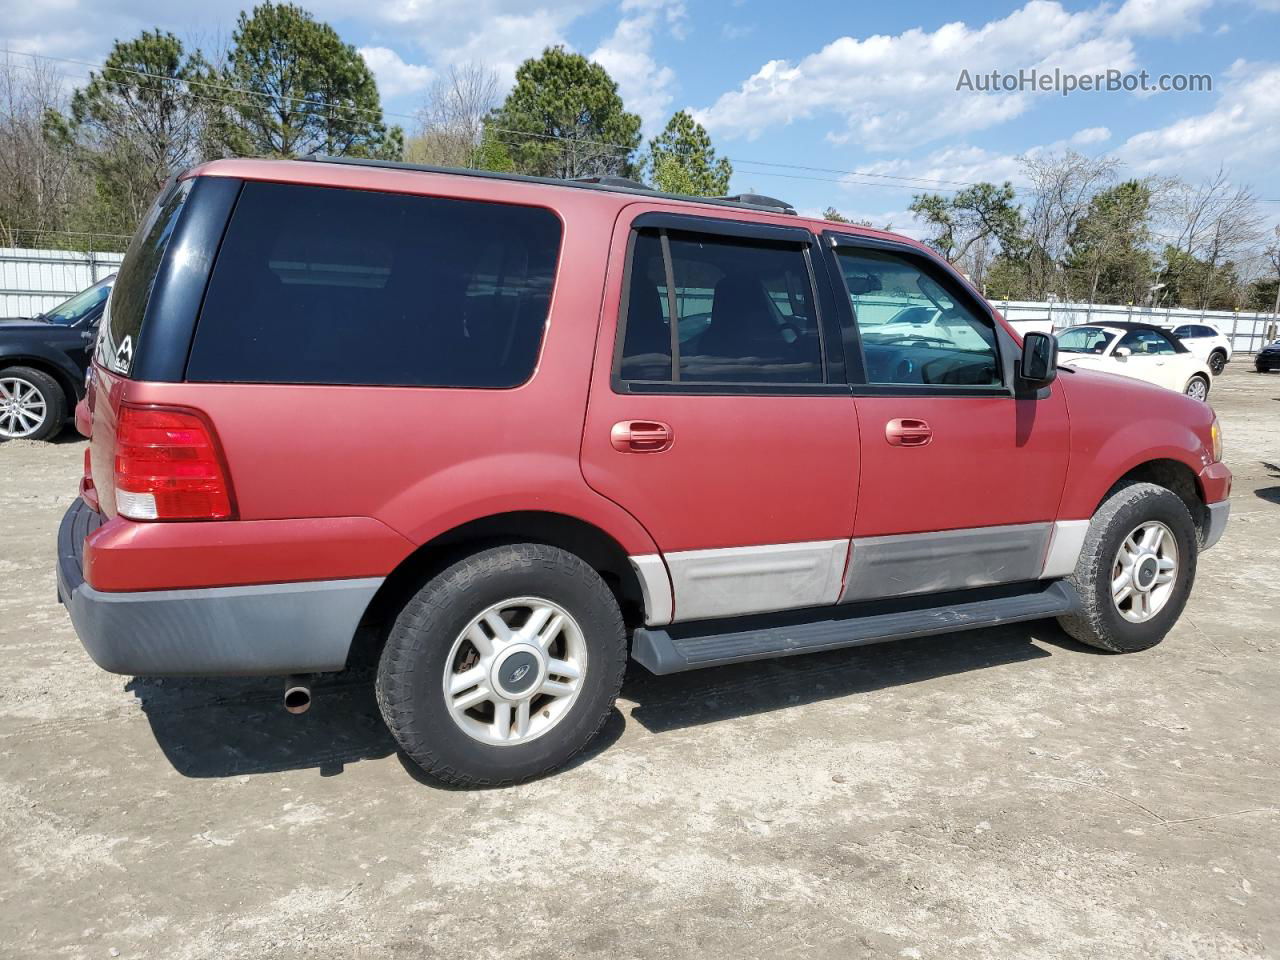 2003 Ford Expedition Xlt Red vin: 1FMPU16L03LB21183